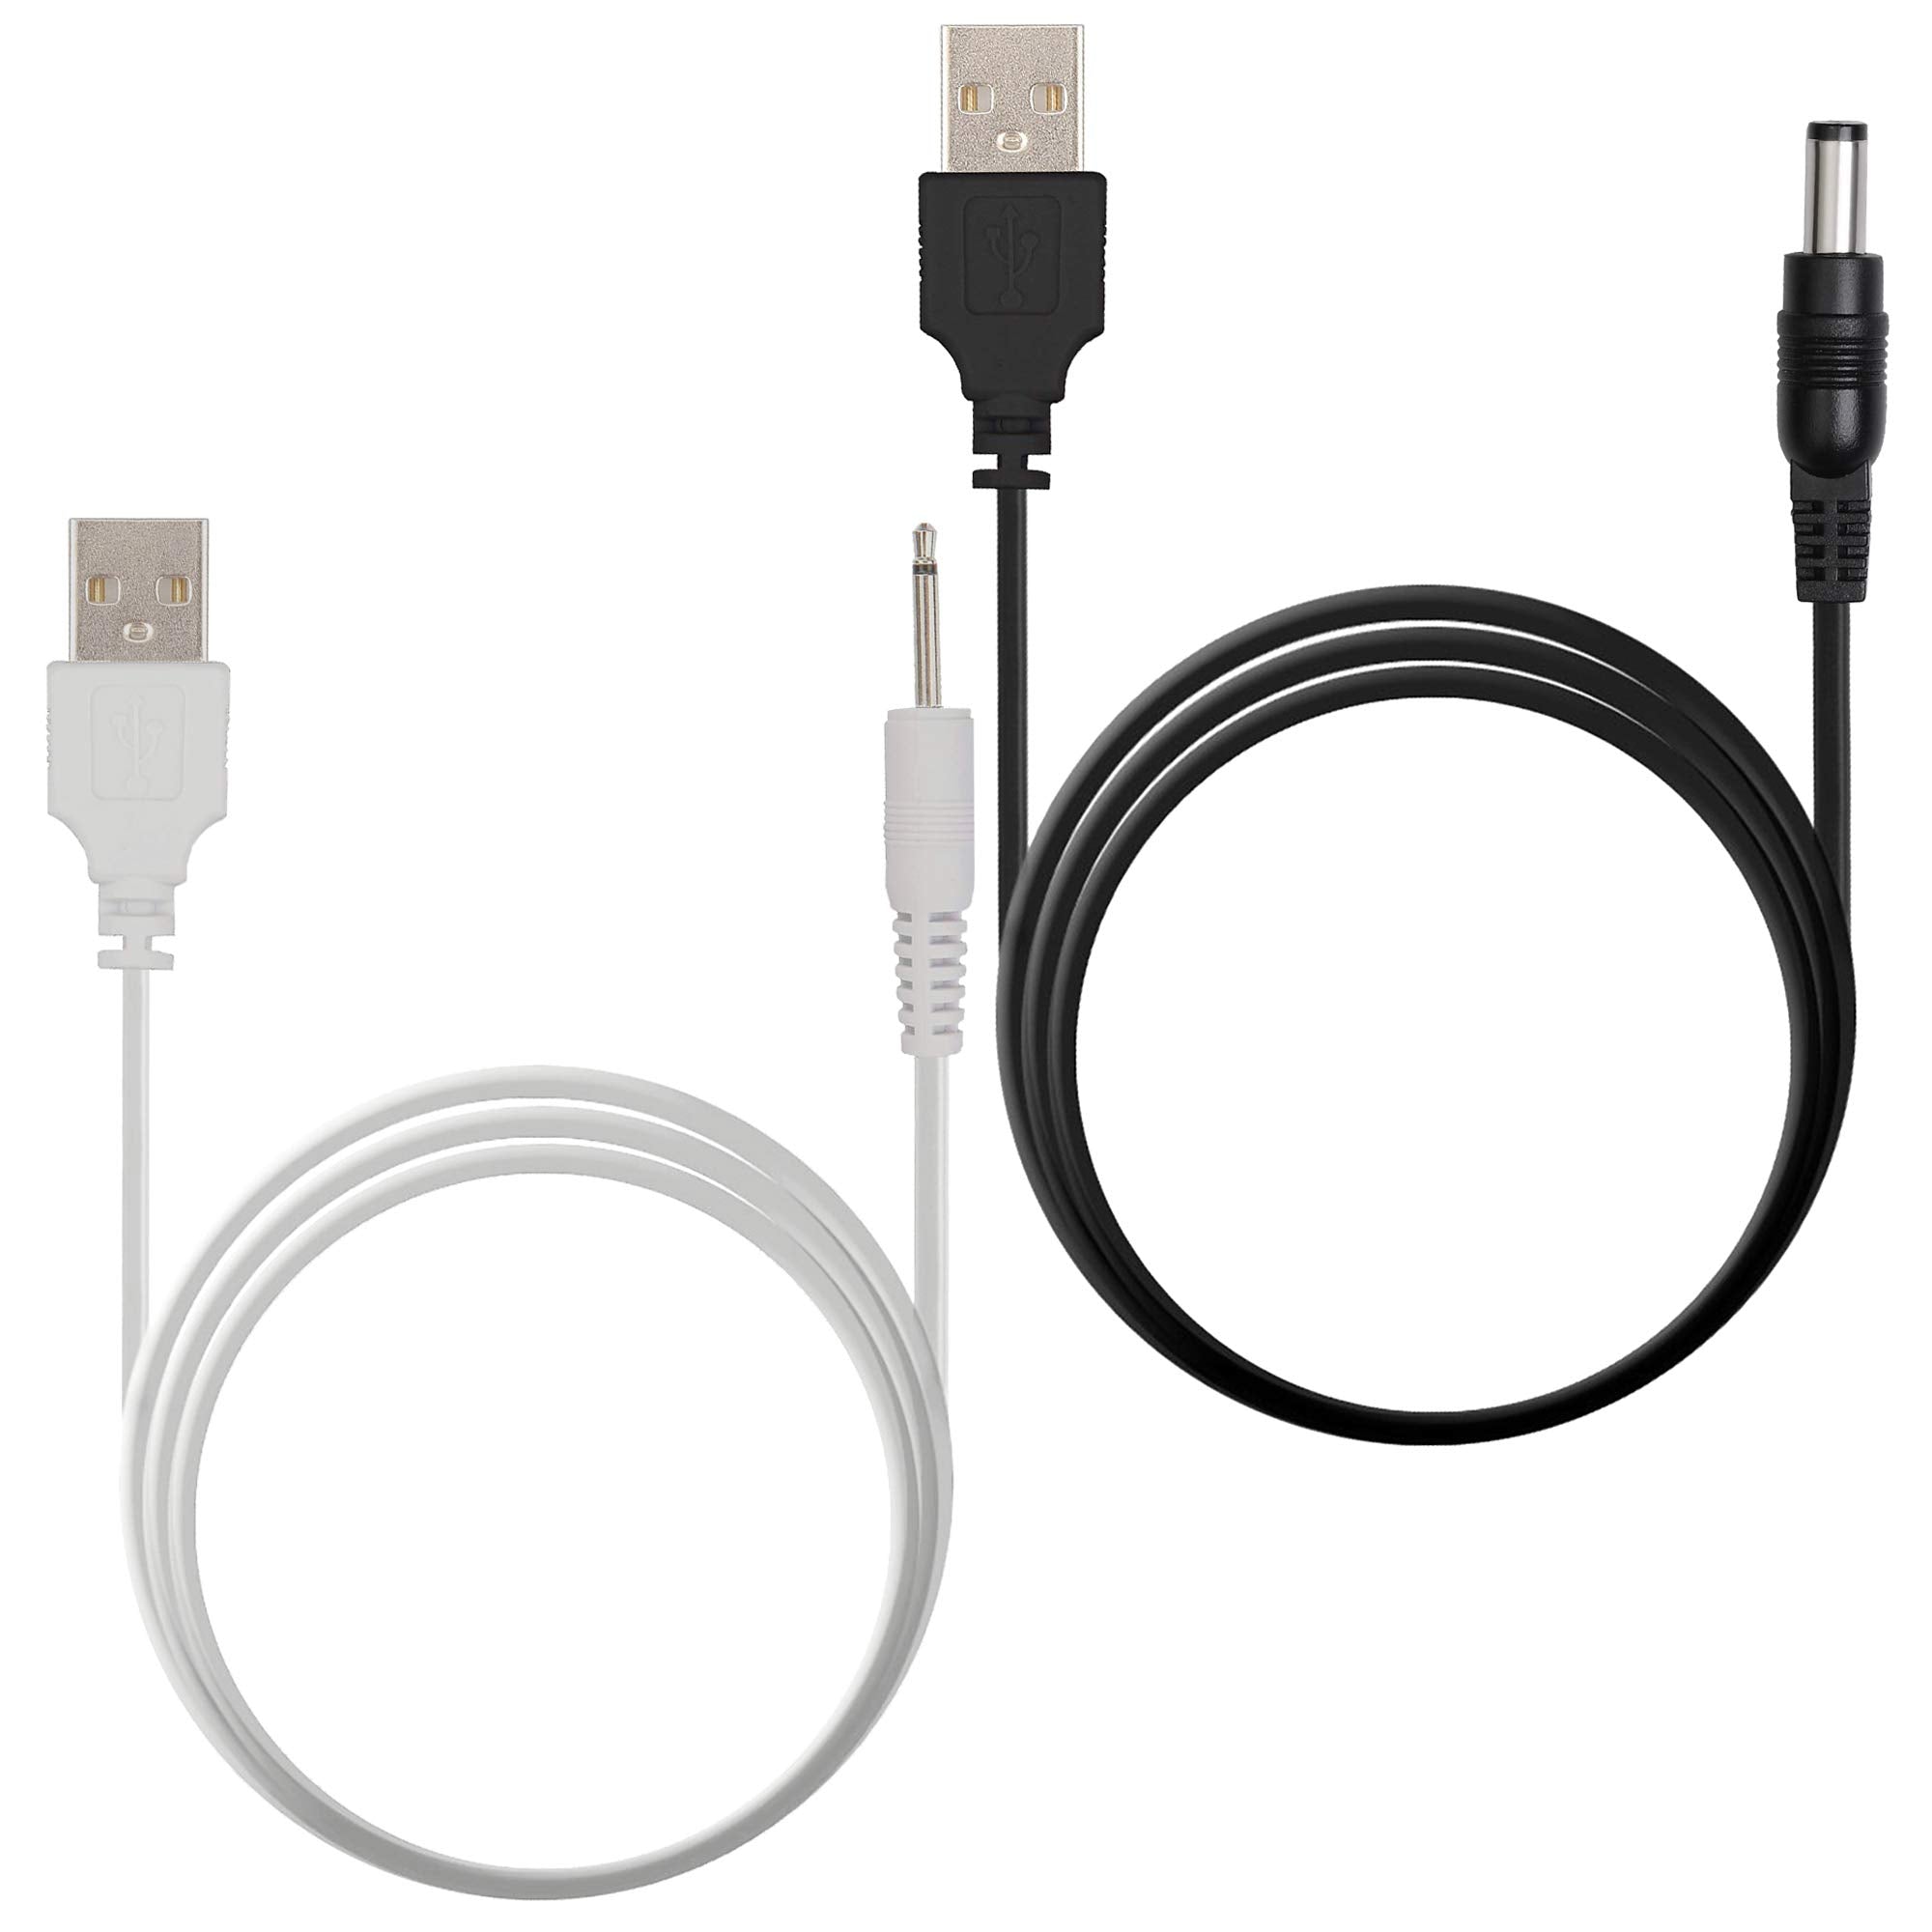 Replacement Charging Cable Set | USB Charger Cords - 2.5mm/5.5mm for Wireless Massagers - Fast Charging